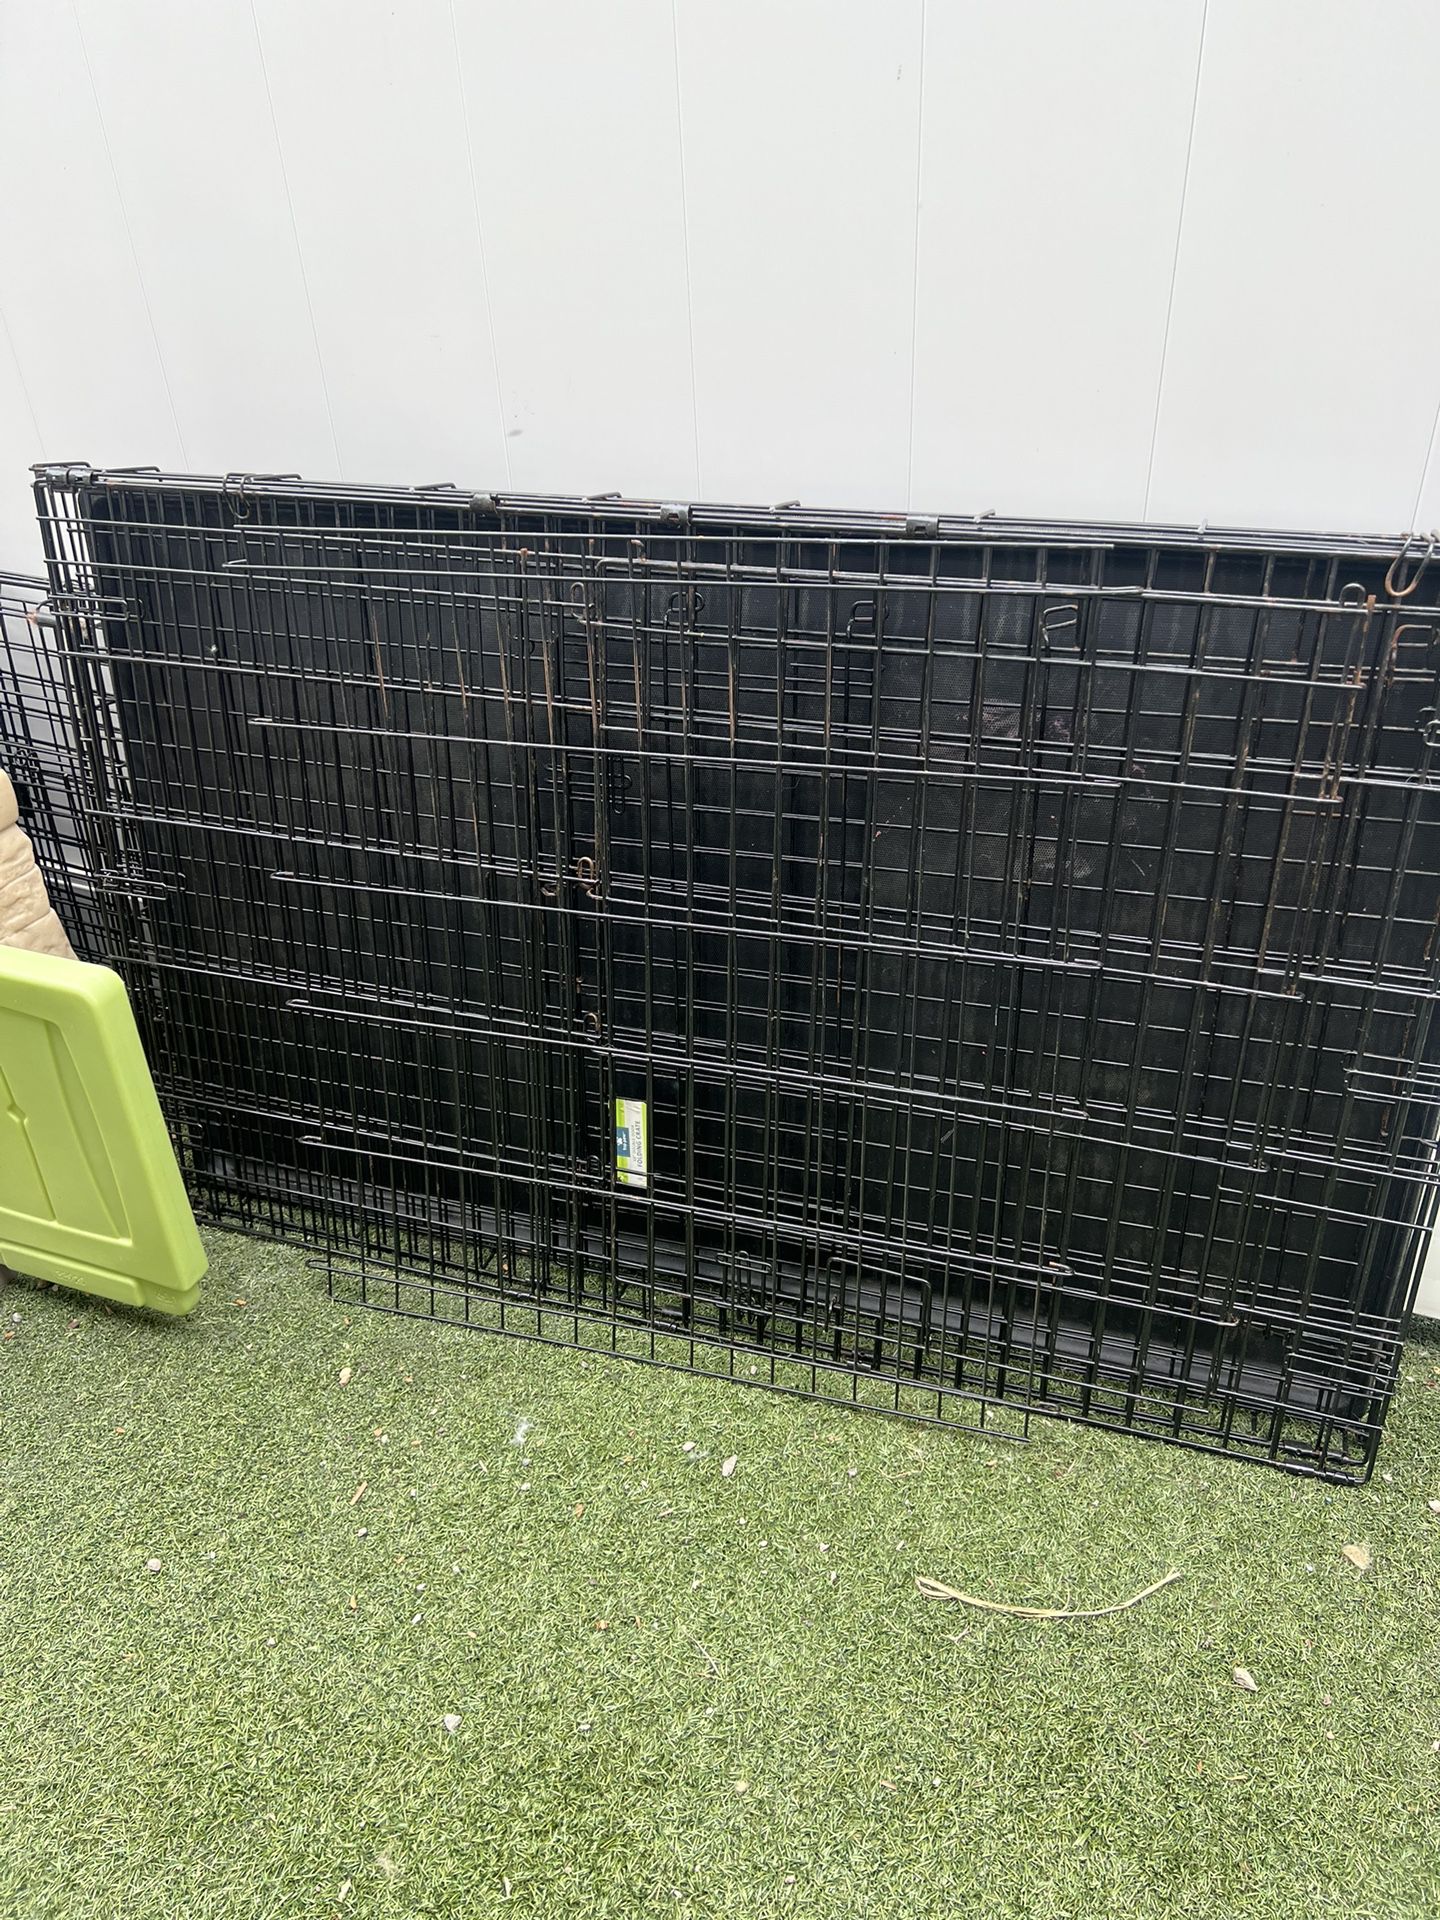 X Large Dog Crate 